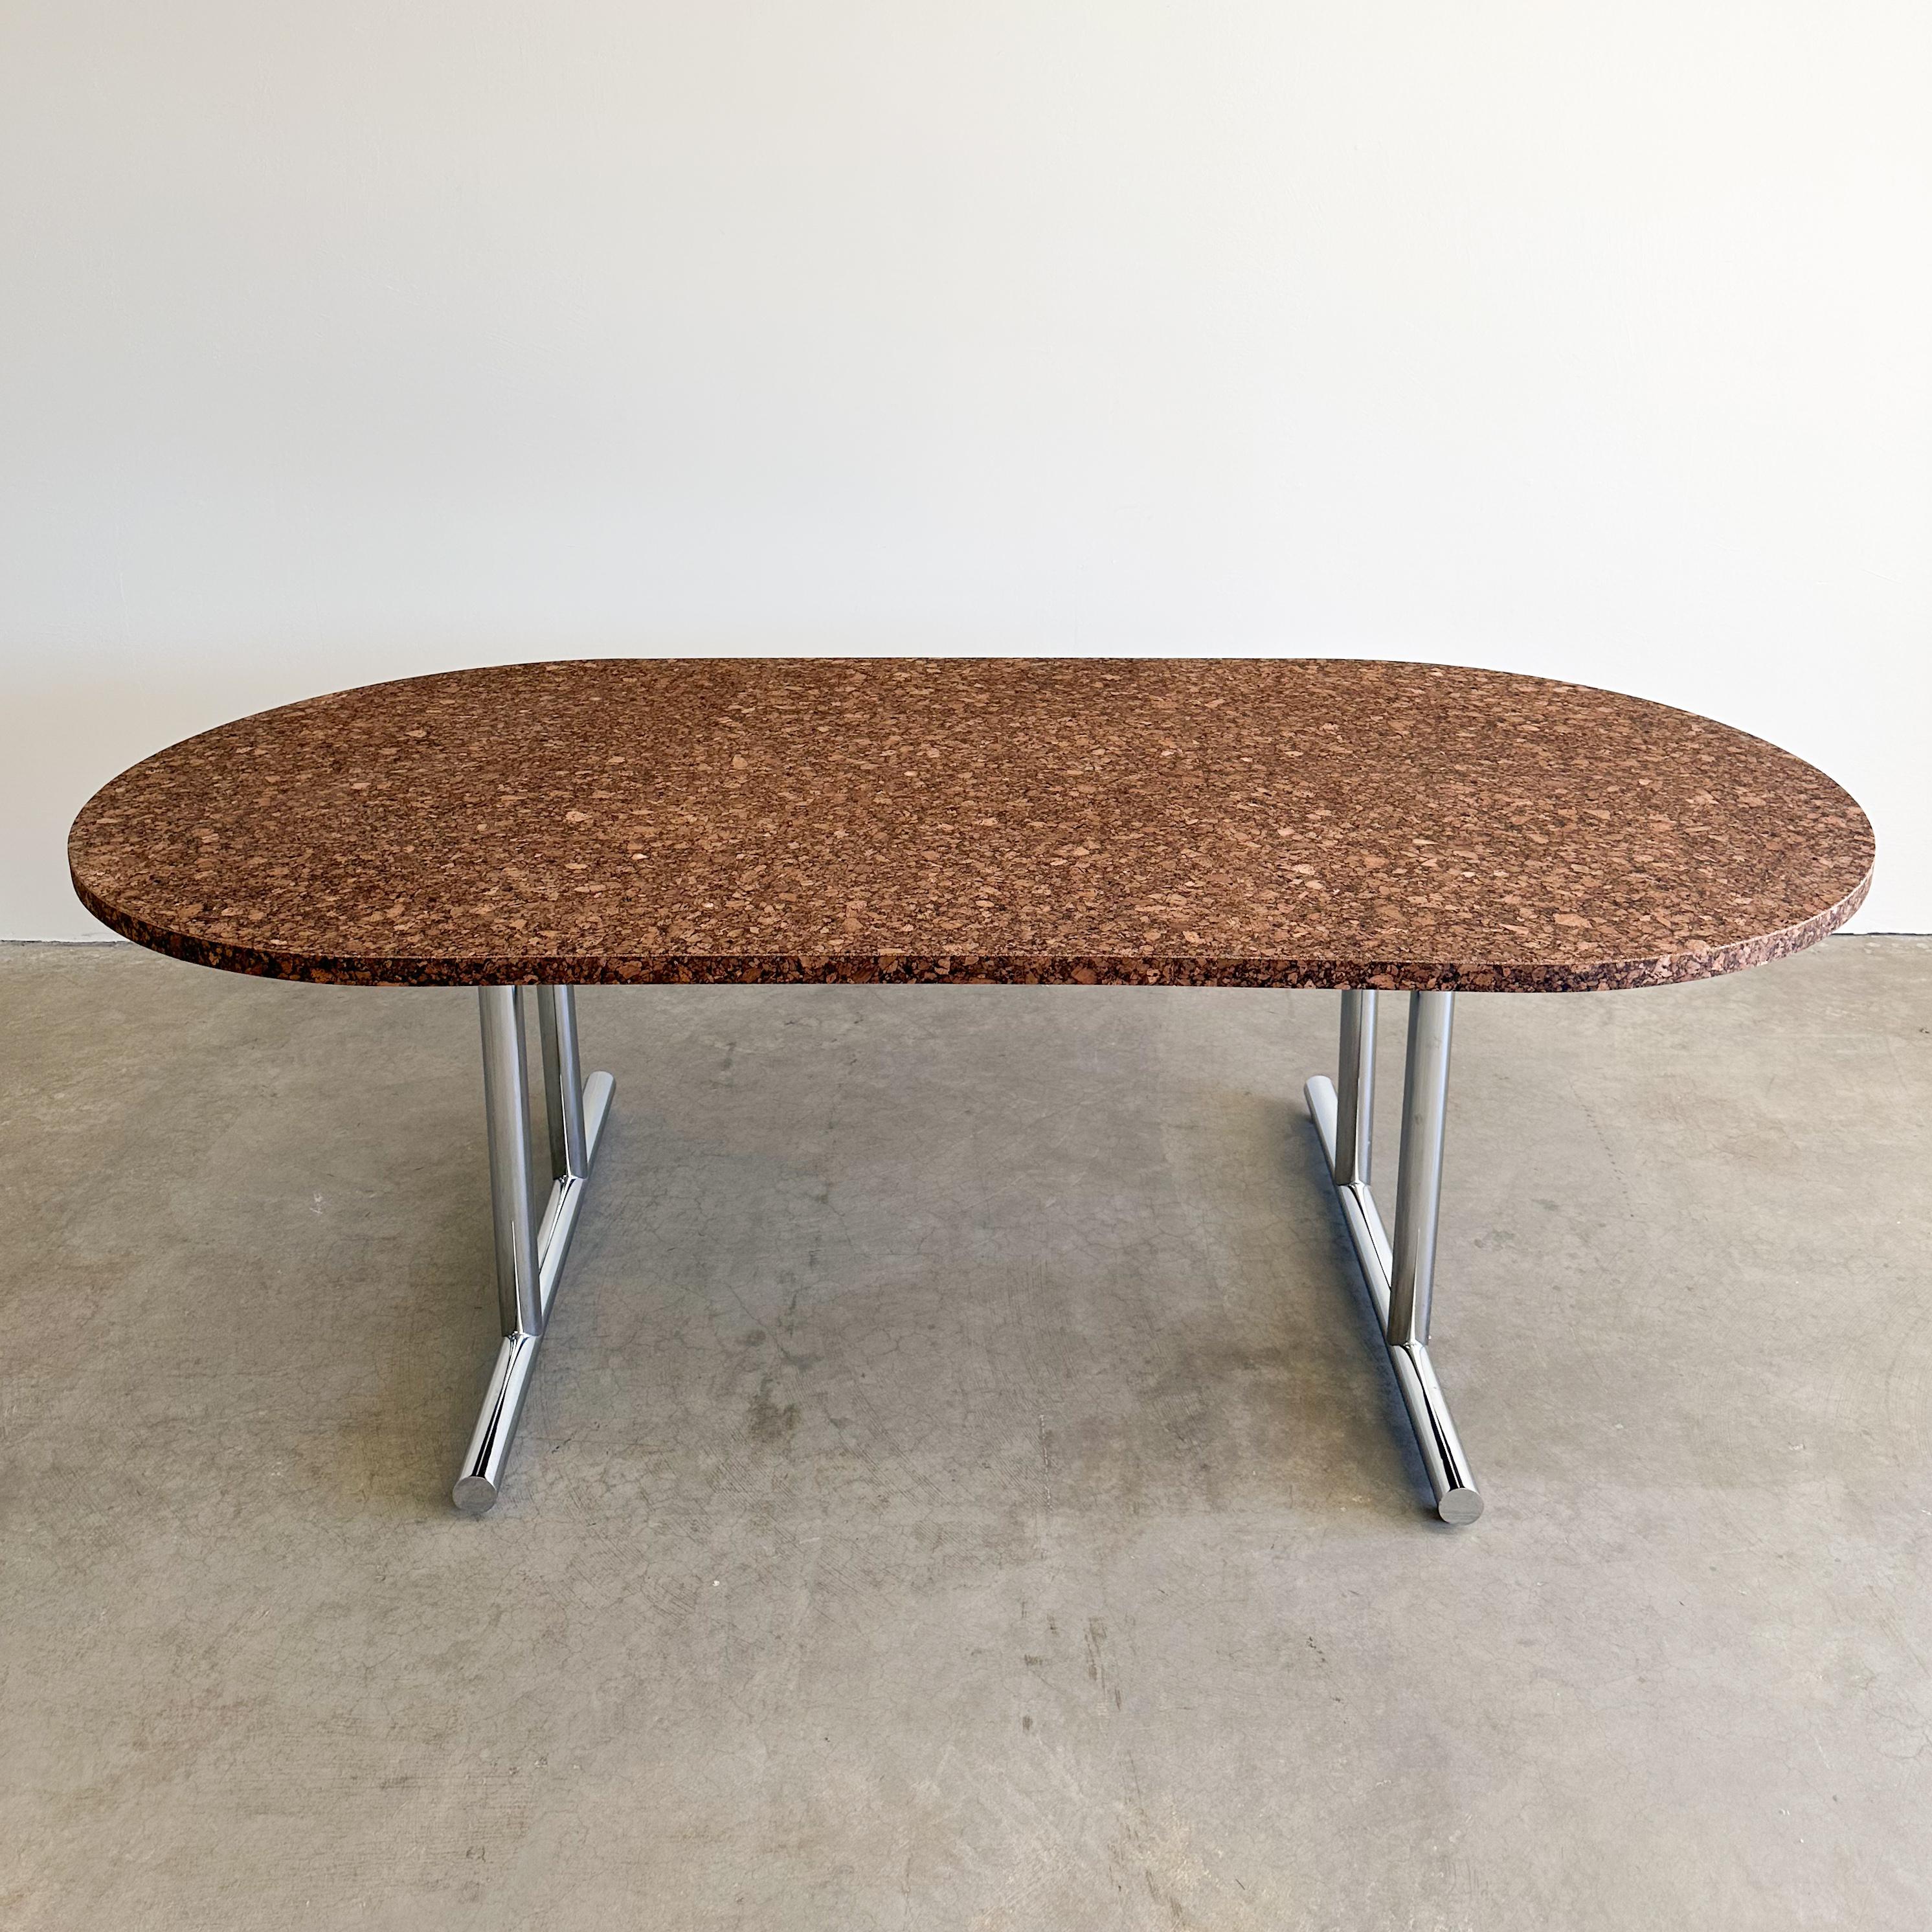 Vintage Cork And Chrome Oval Dining Table Conference Table Desk MCM Minimalist  In Excellent Condition For Sale In Palm Desert, CA